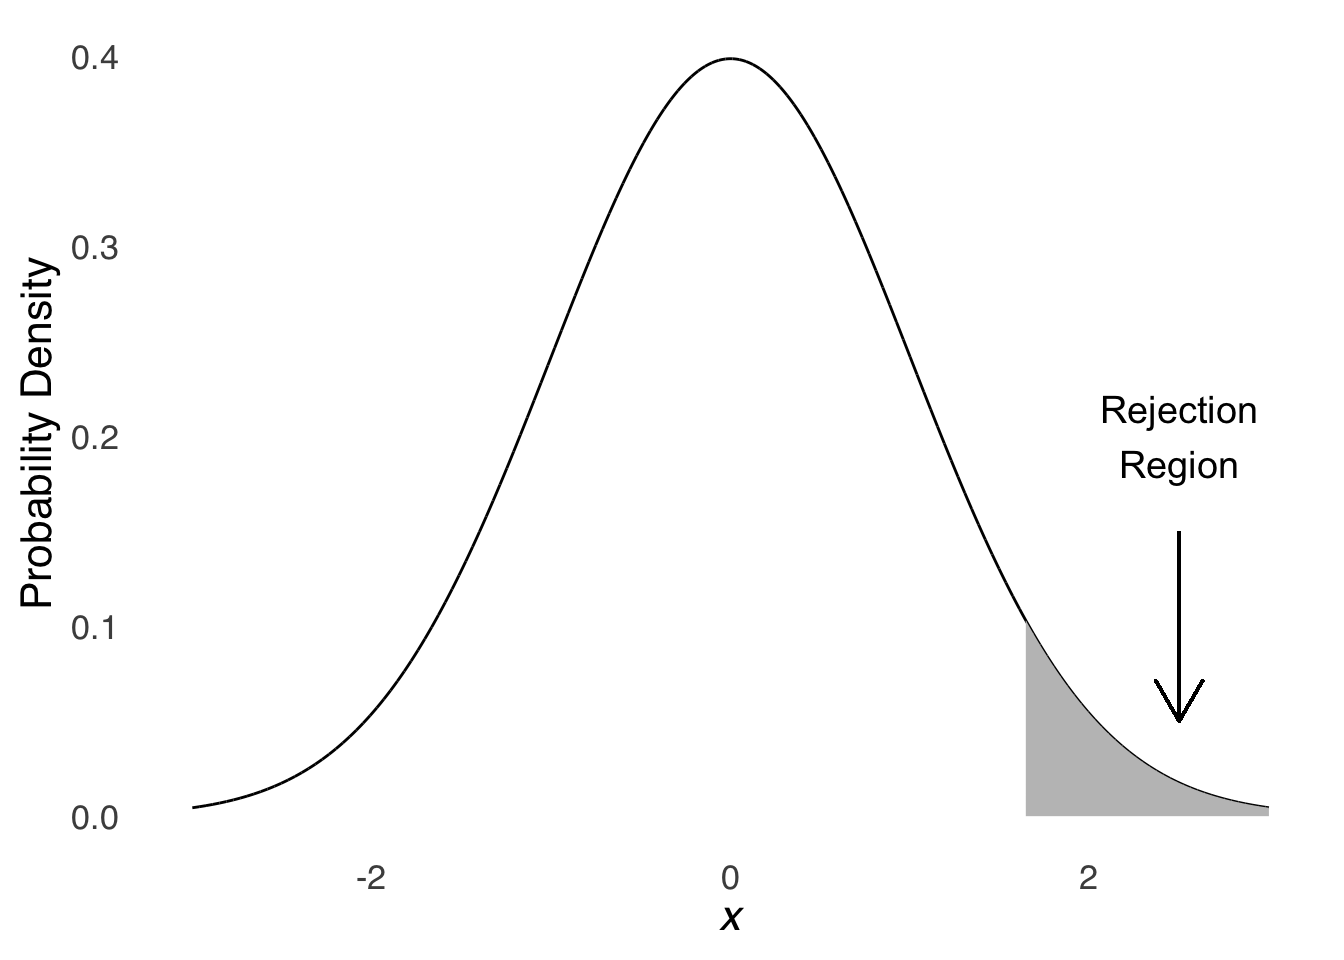 Normal Distribution with an Upper-tail 5% Rejection Region